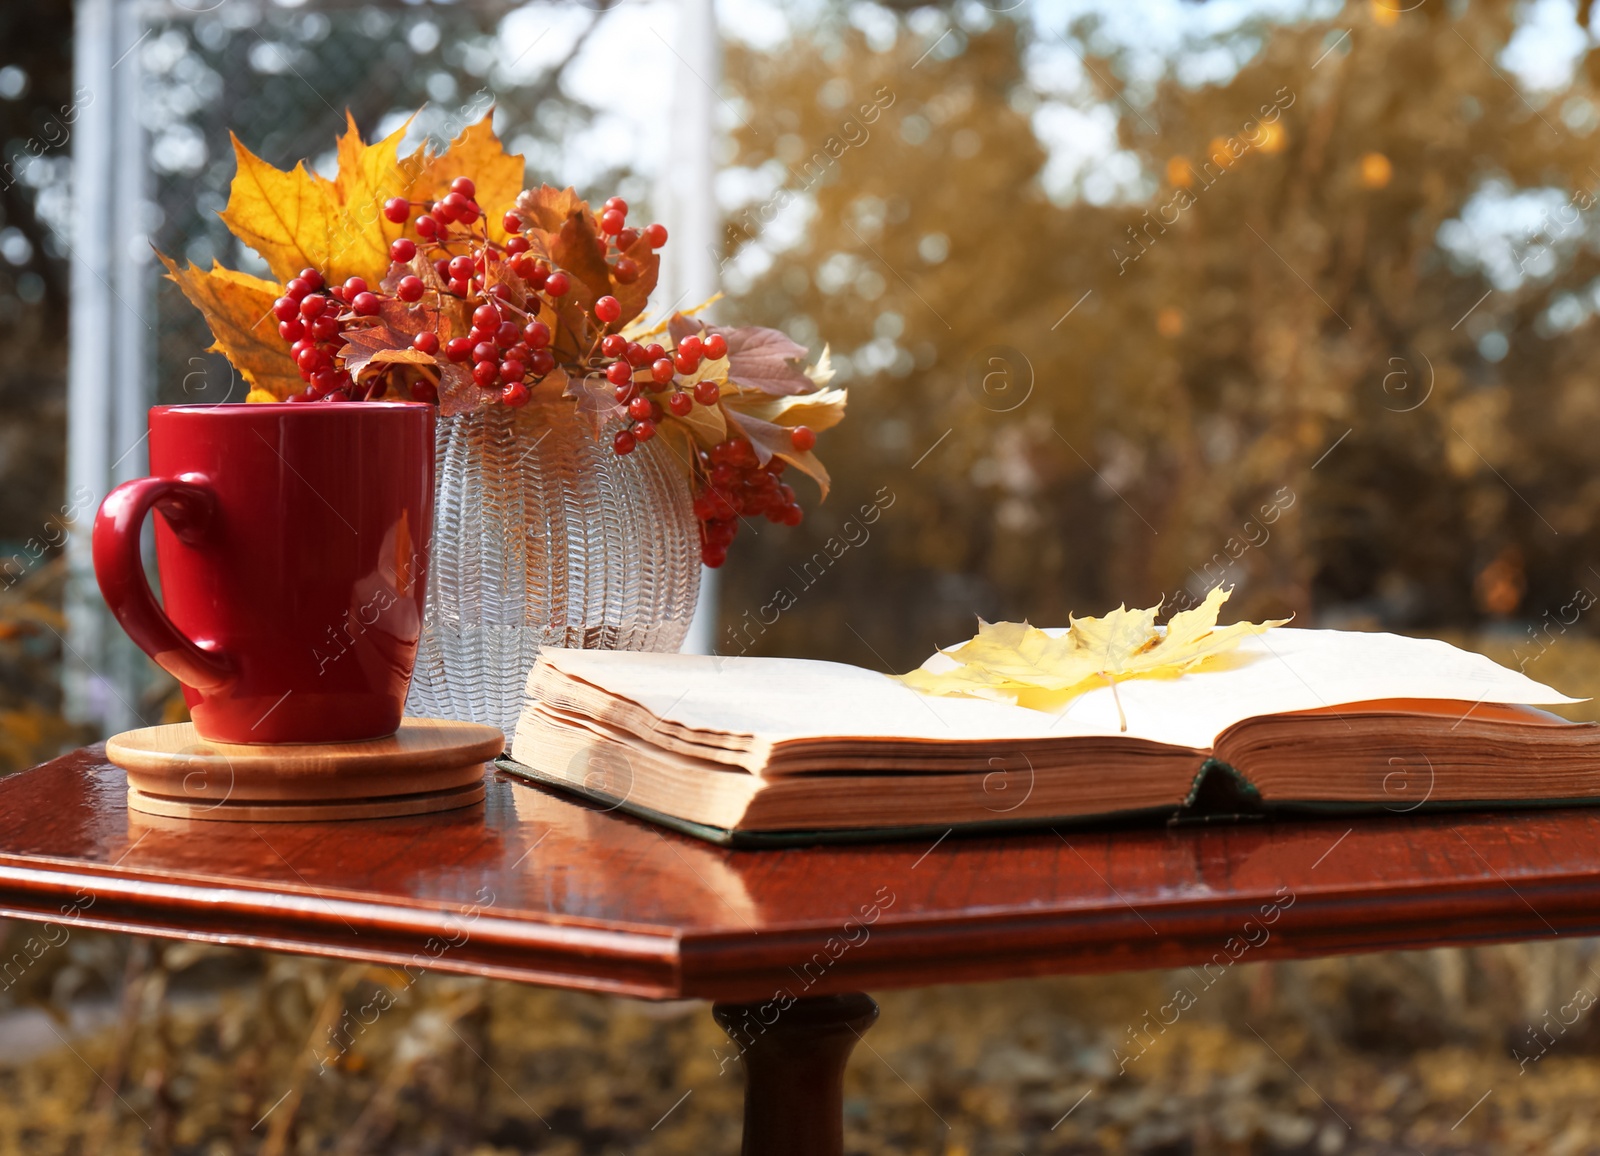 Photo of Cup of hot drink, book and dry leaves with viburnum on wooden table outdoors. Autumn atmosphere